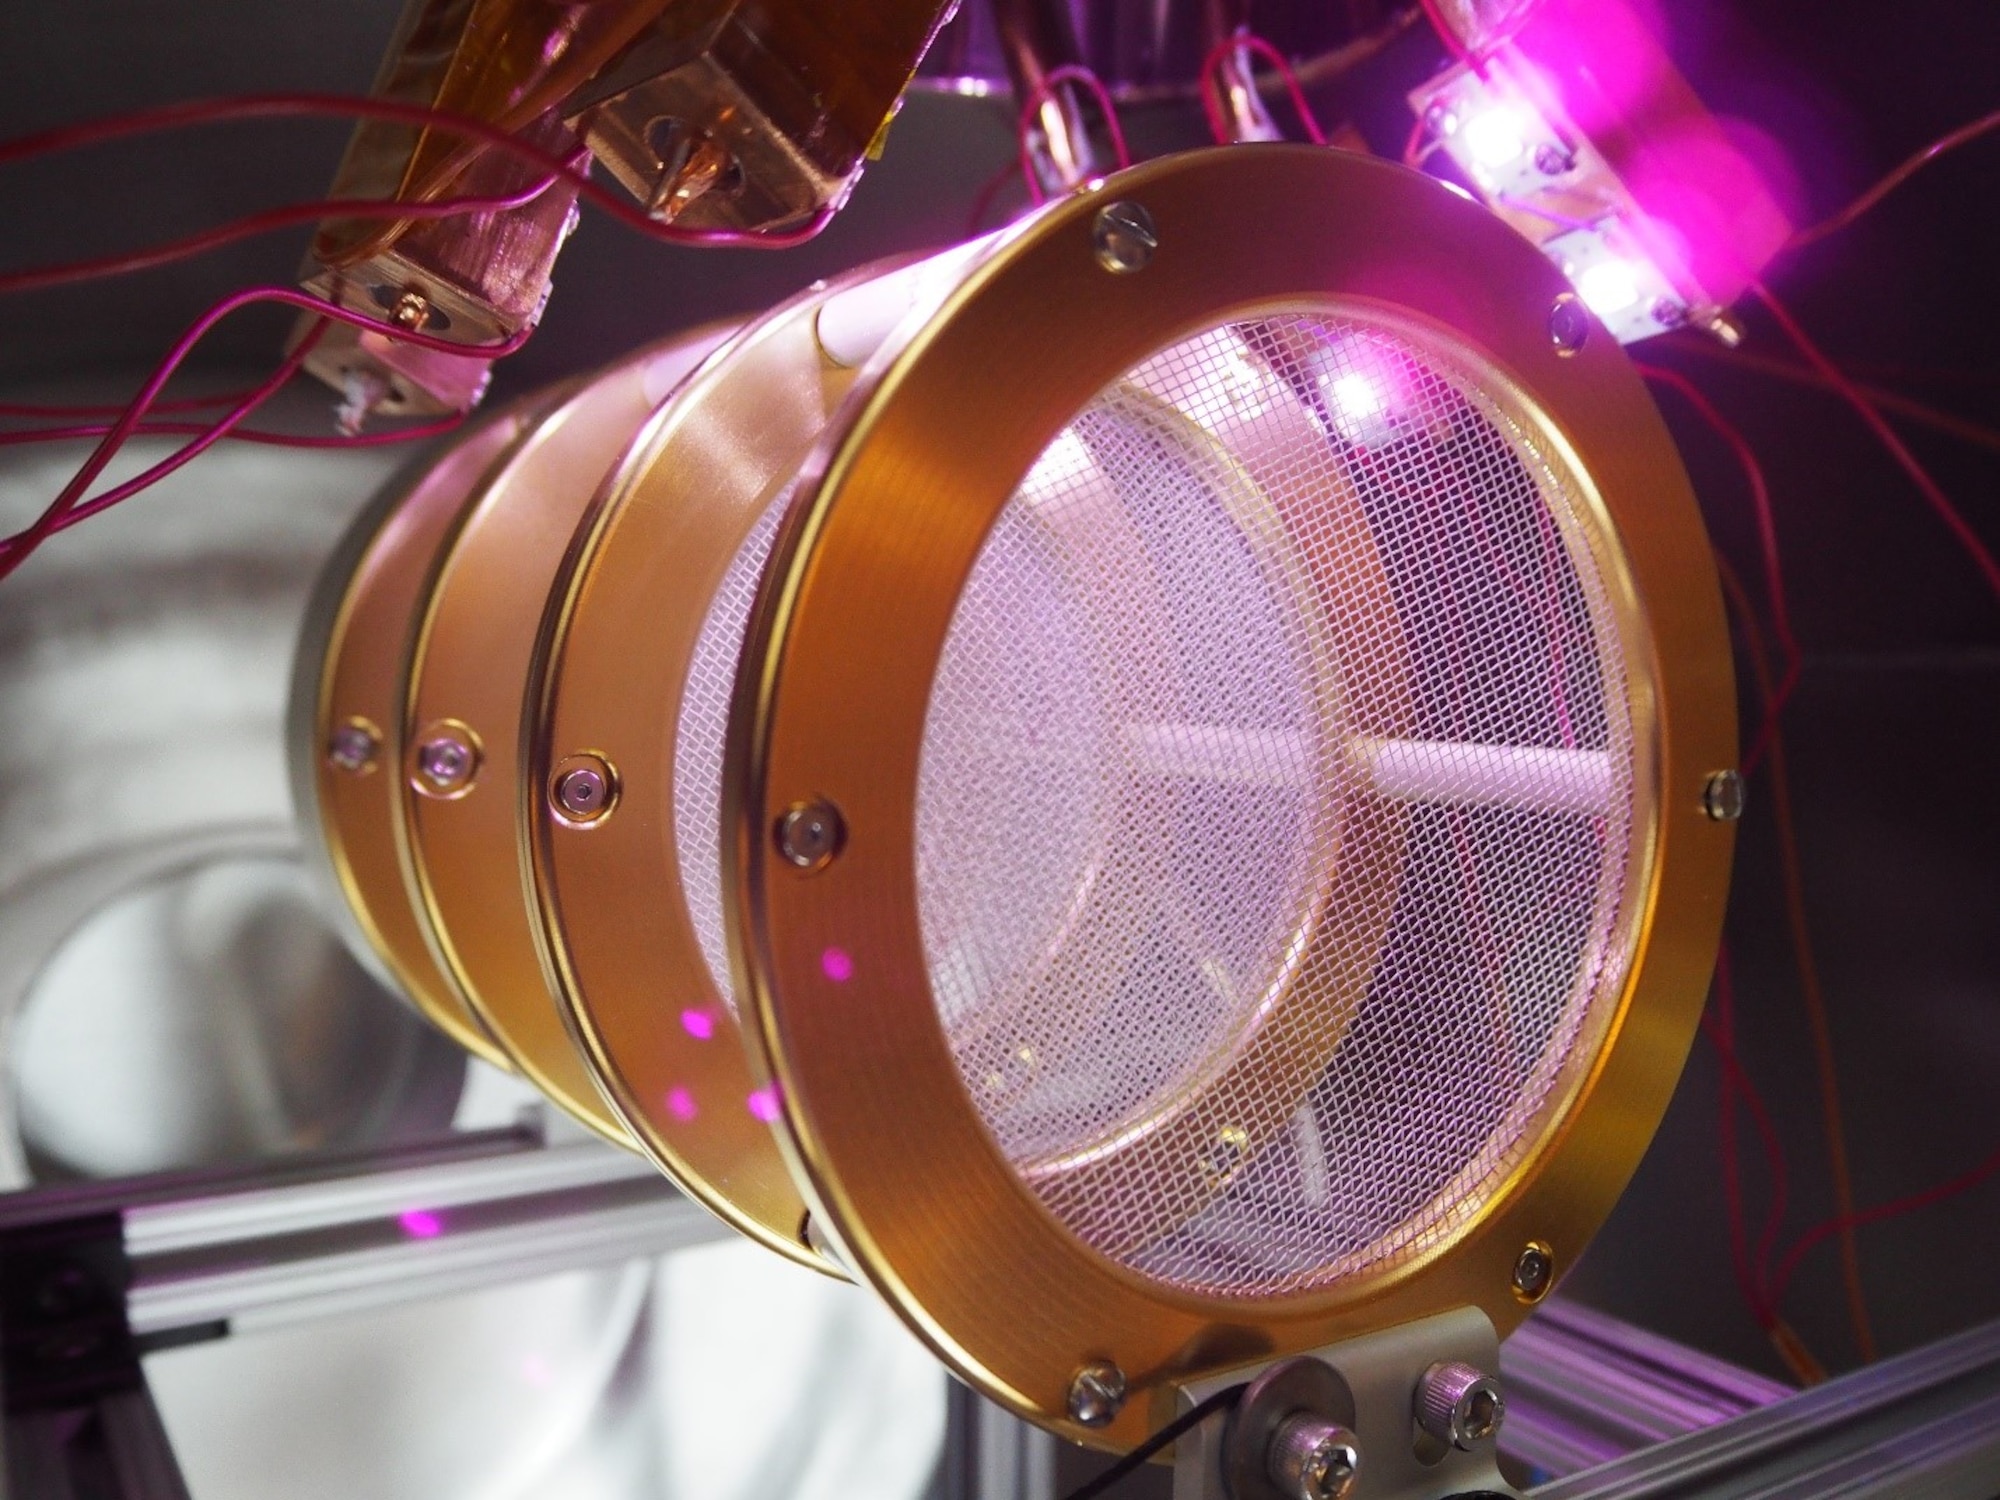 The multi-energy electron source undergoes testing in a vacuum chamber at the Air Force Research Laboratory Space Vehicles Directorate’s Spacecraft Charging and Instrument Calibration Laboratory at Kirtland Air Force Base, N.M.